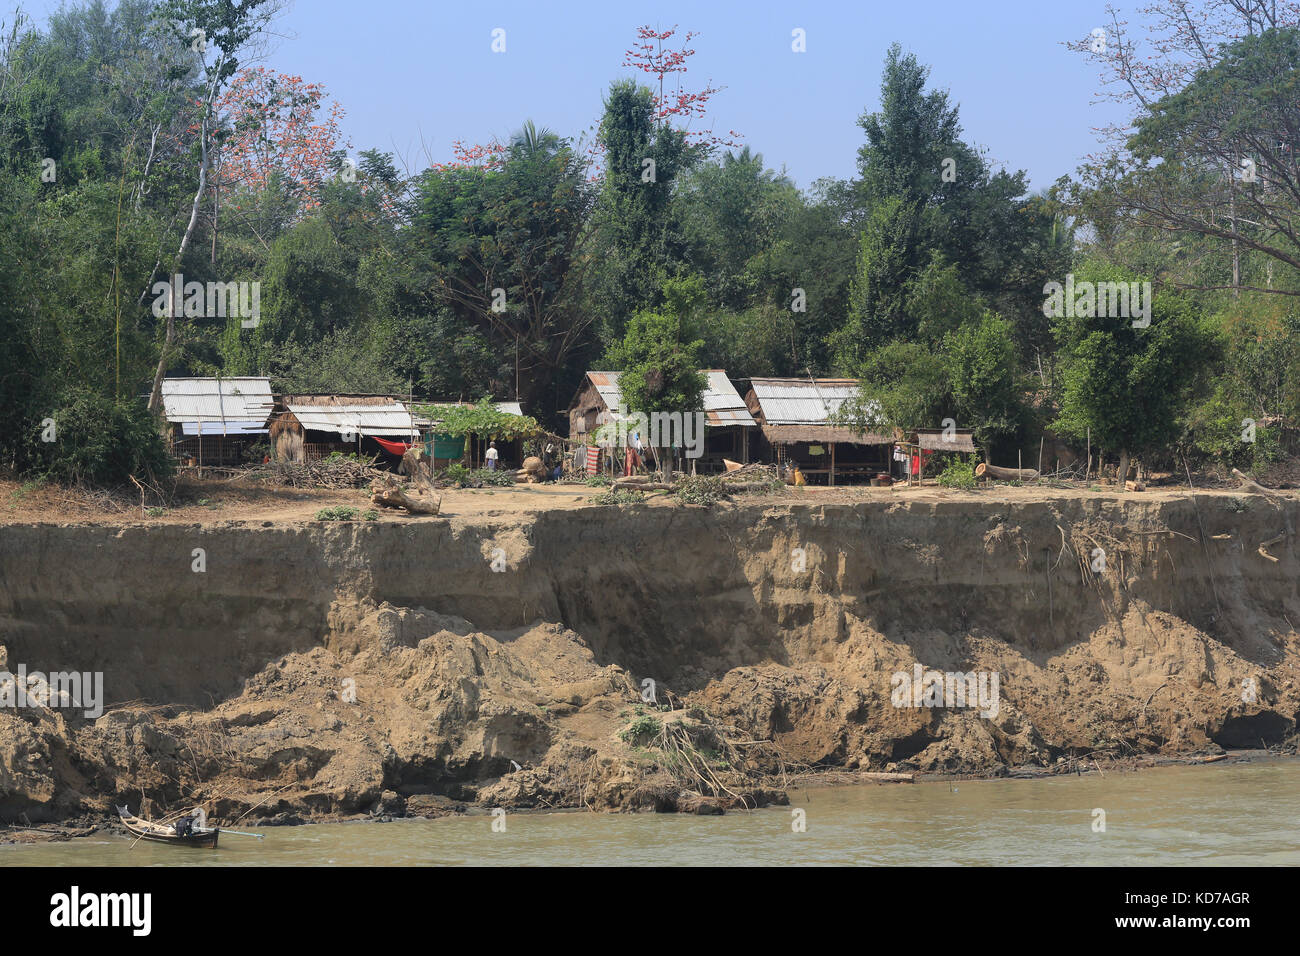 Boats are moored and beached along an eroding reach of the Irrawaddy River in Myanmar (Burma). Stock Photo